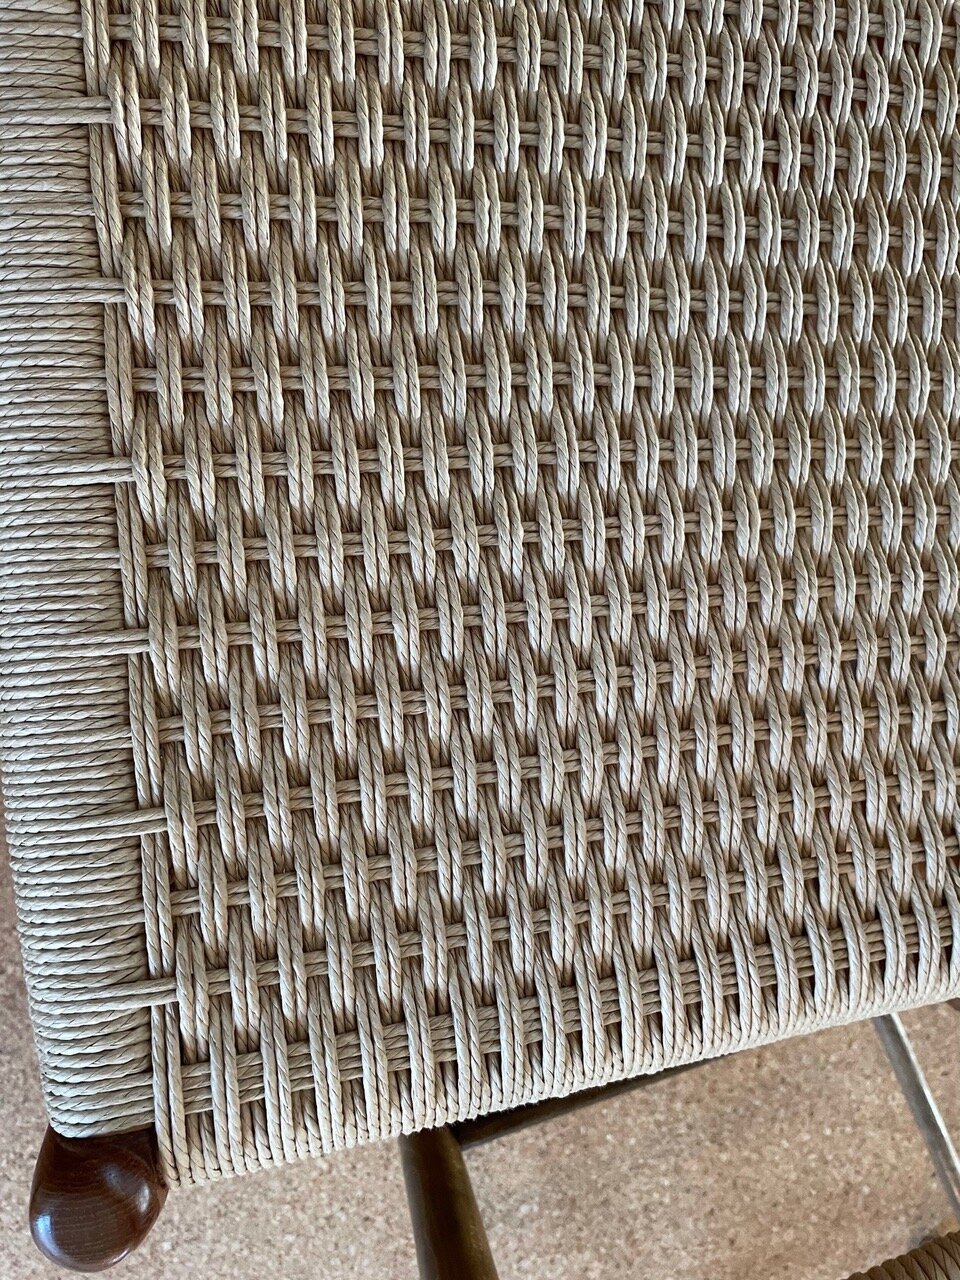 Danish Cord Weave, A Cane Wood and Wicker Fixer